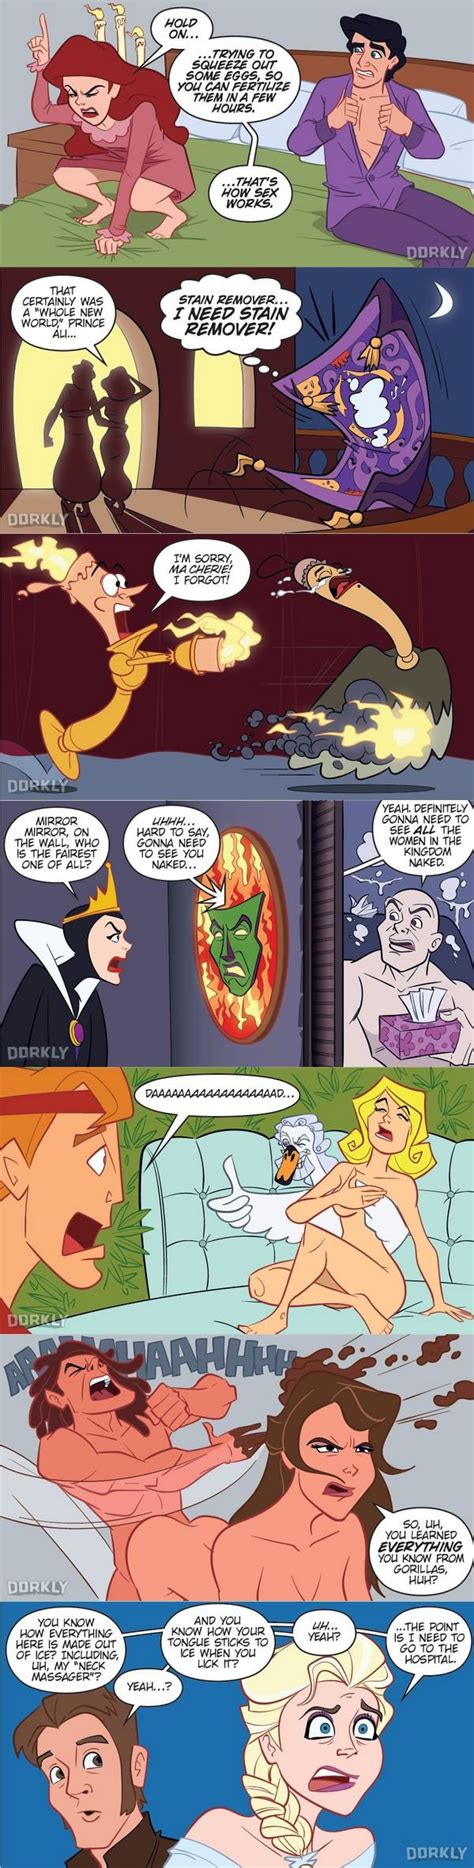 7 disney movies you ll be glad didn t have sex scenes disney movies scene and movie